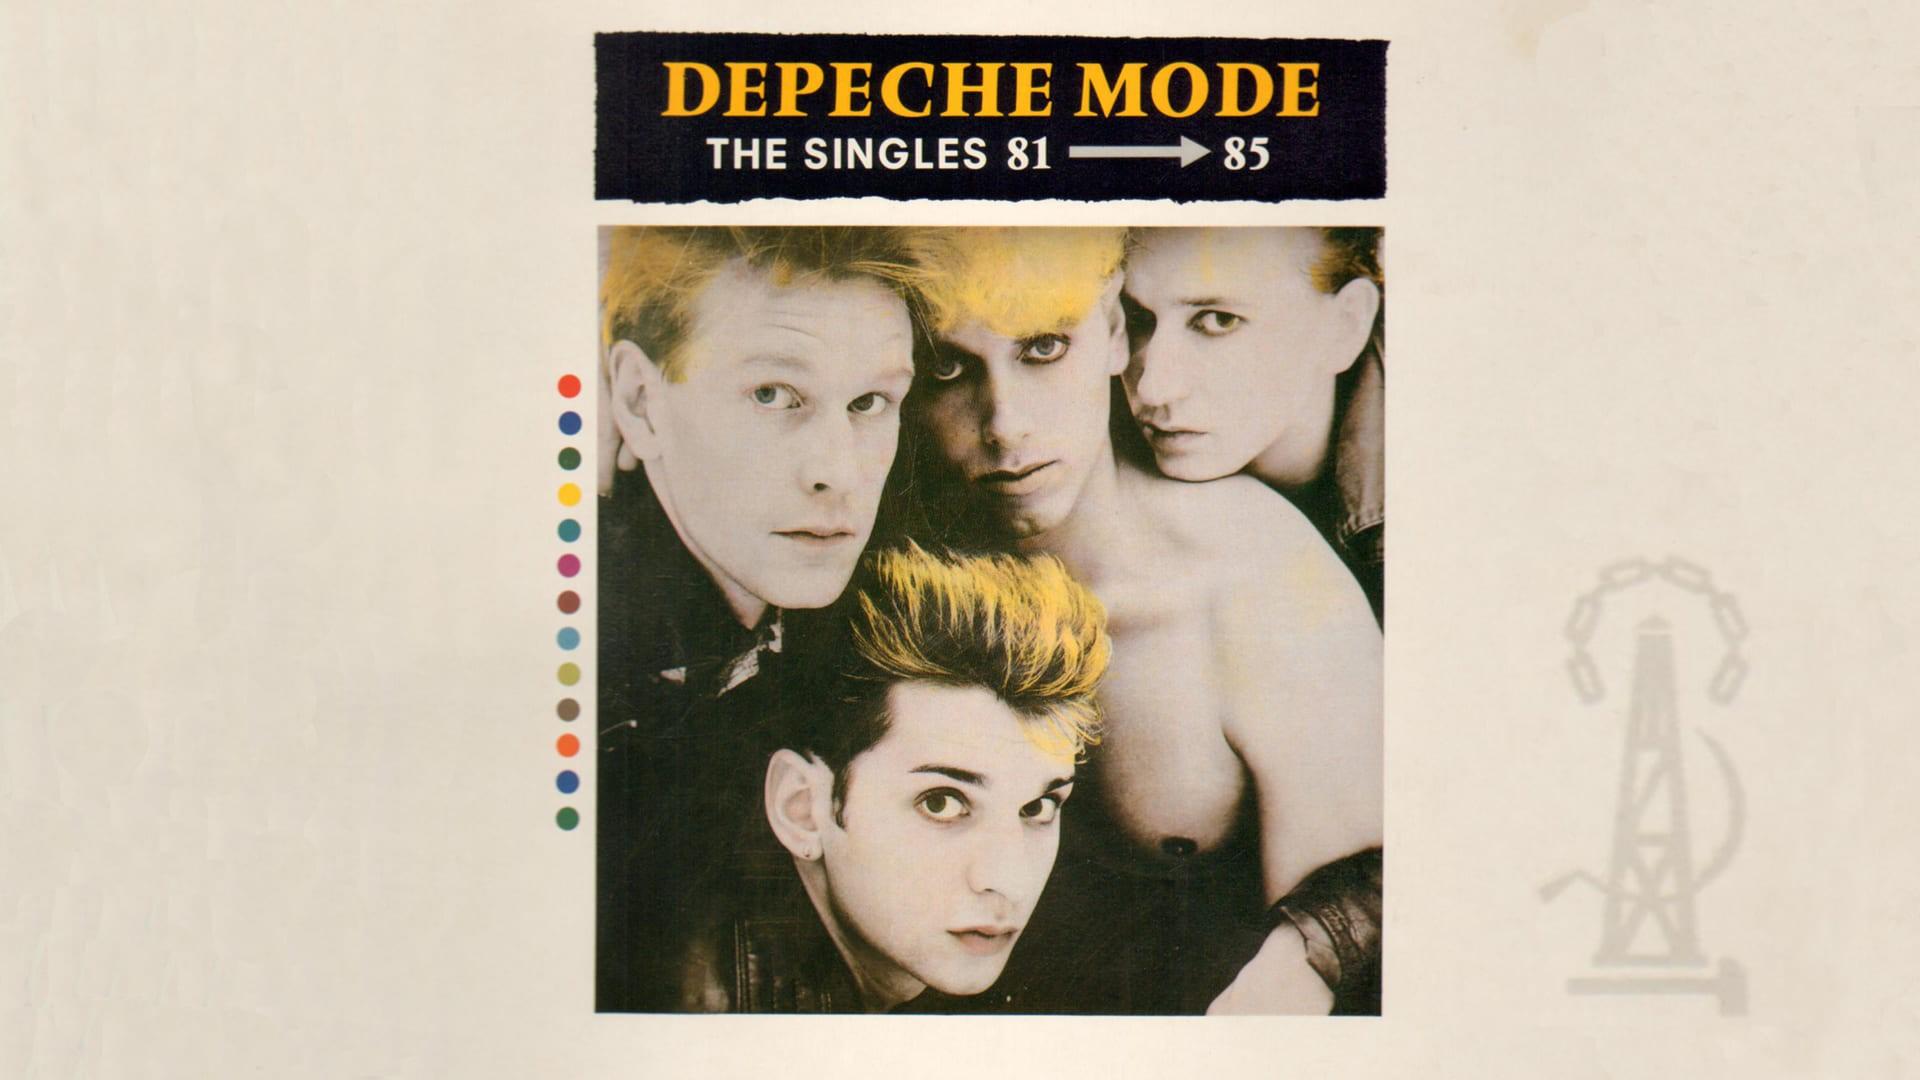 Depeche Mode 1985-86 : The Songs Aren't Good Enough, There Aren't Any Singles and It'll Never Get Played on the Radio